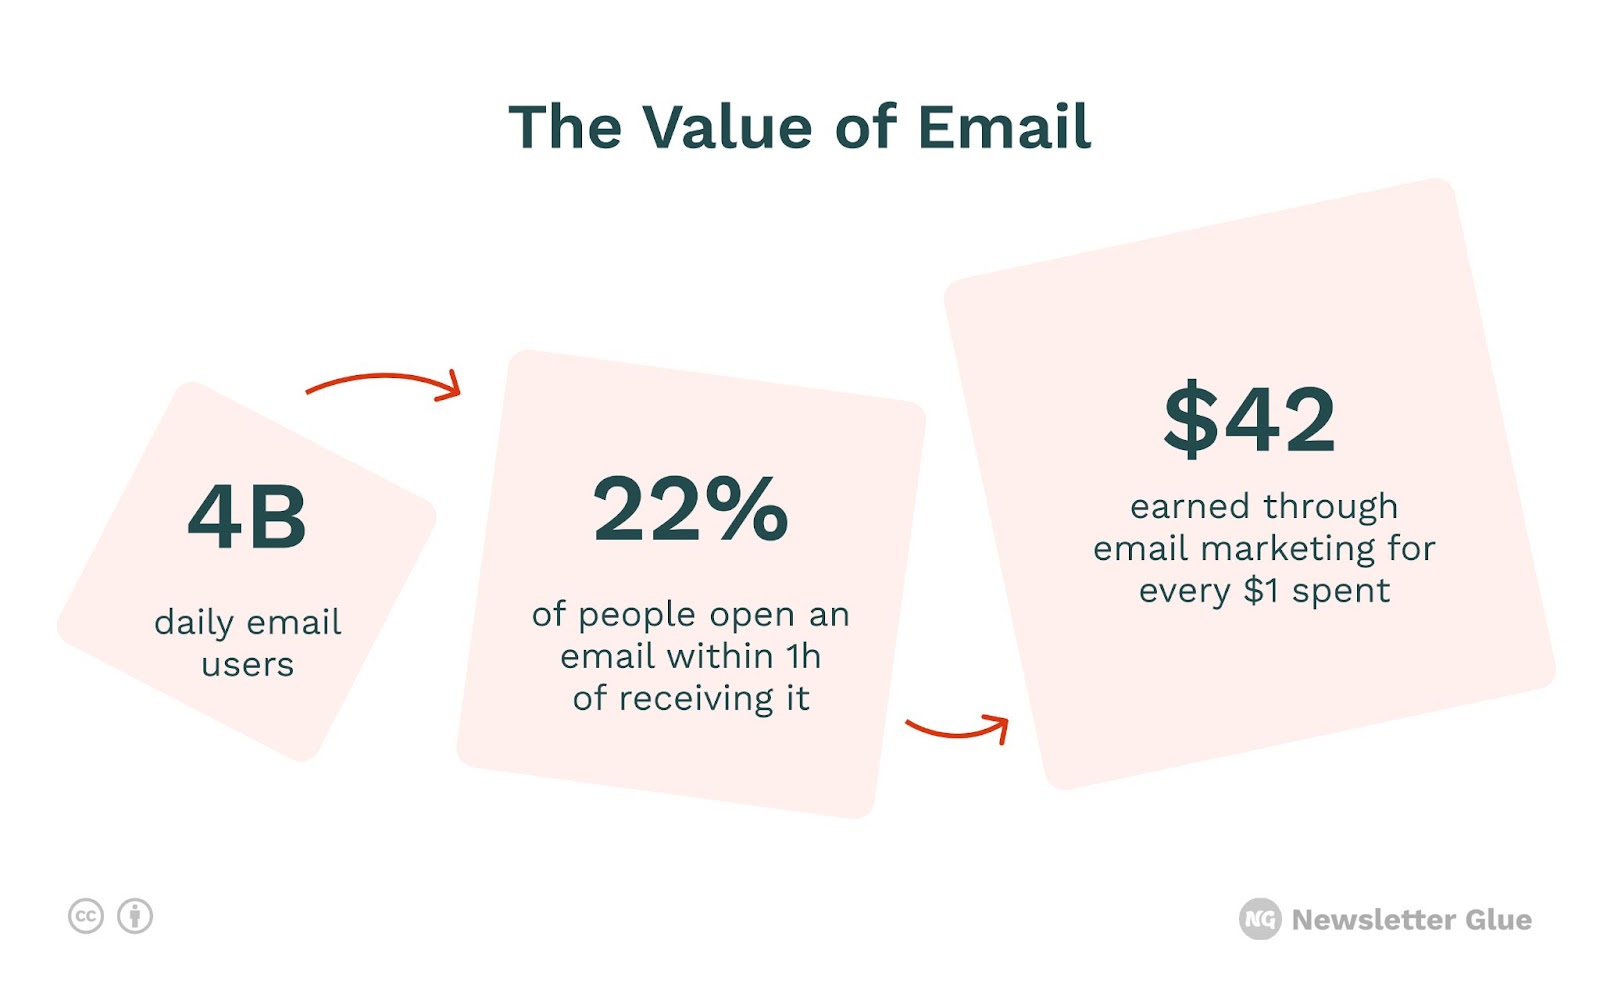 This image shows the Value of Email. 4 billion daily users, 22% open rate within an hour, and $42 earned through email marketing for every dollar spent. 